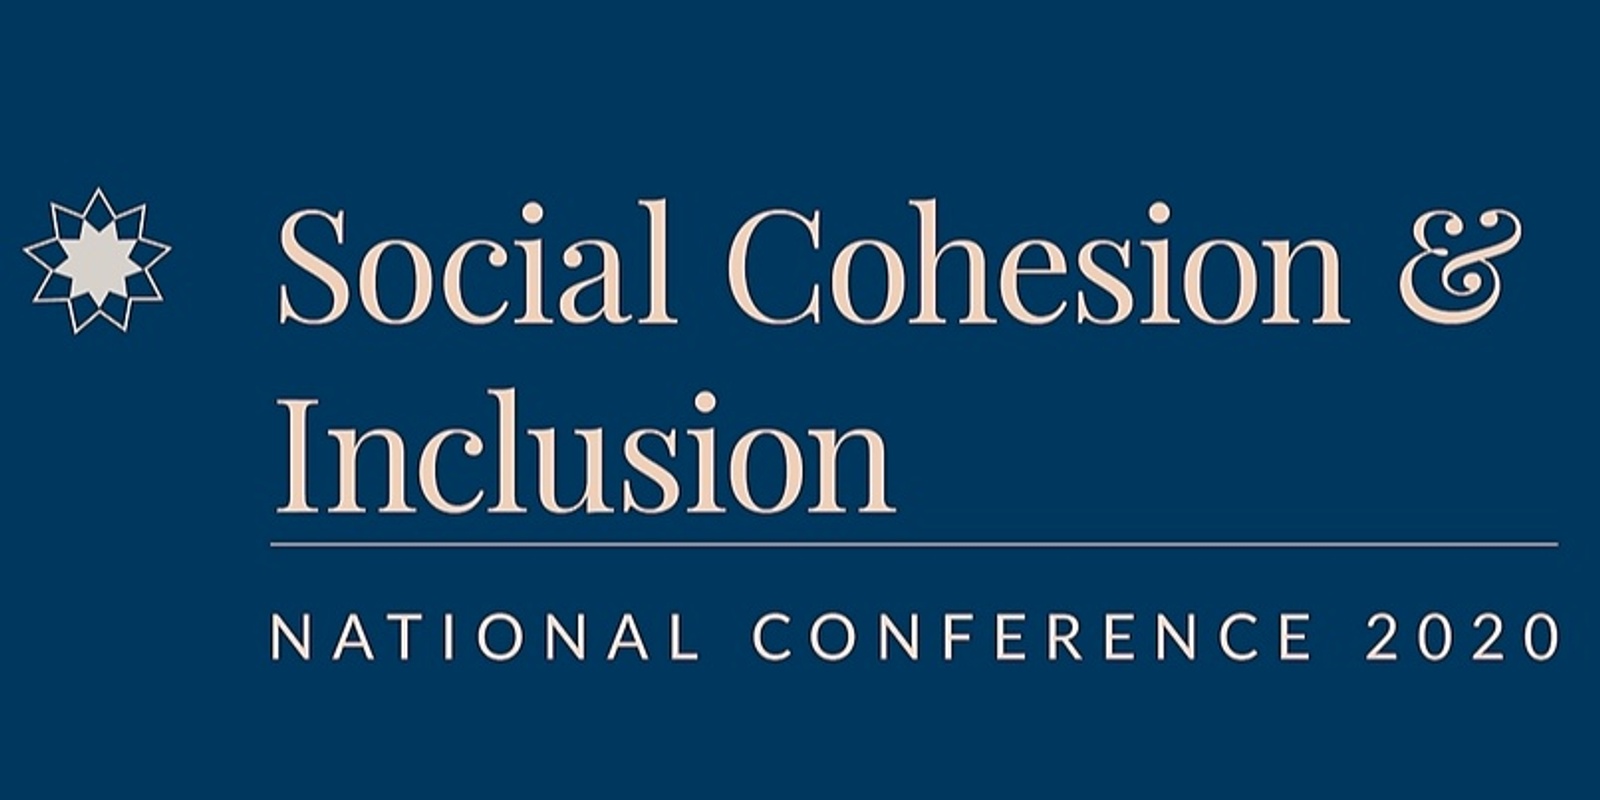 Banner image for Social Cohesion & Inclusion National Conference 2020